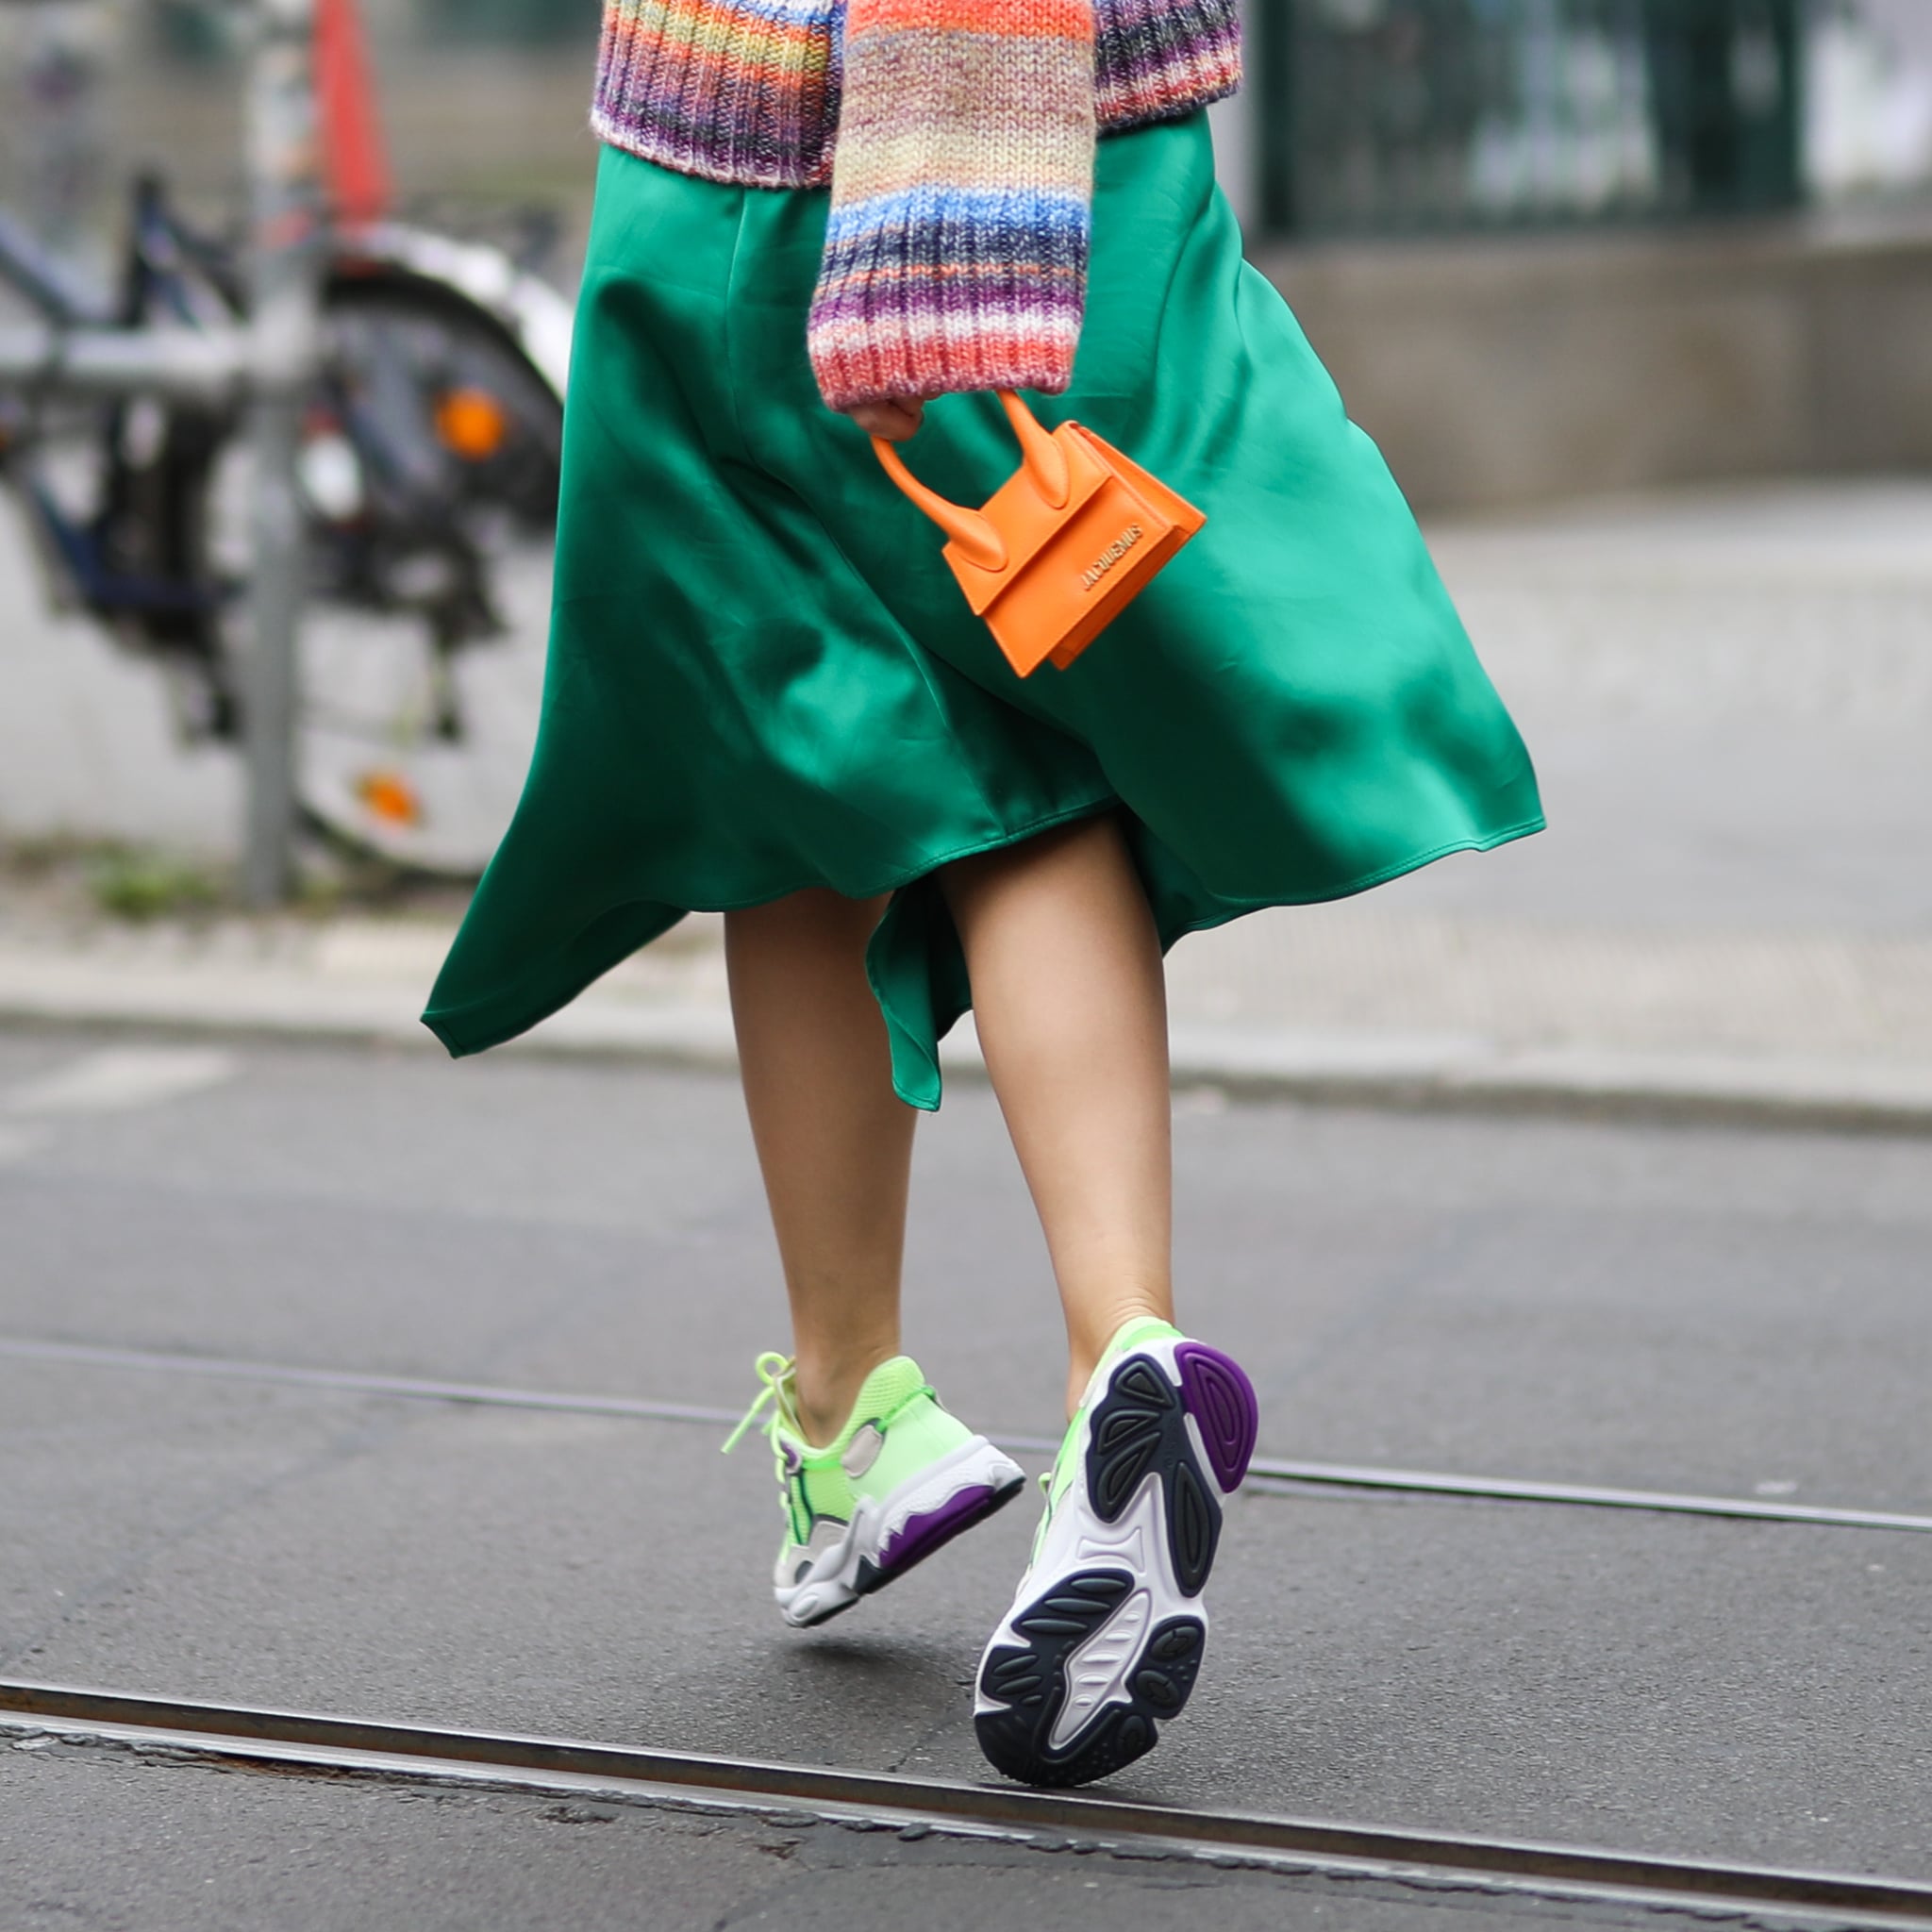 most stylish sneakers for women